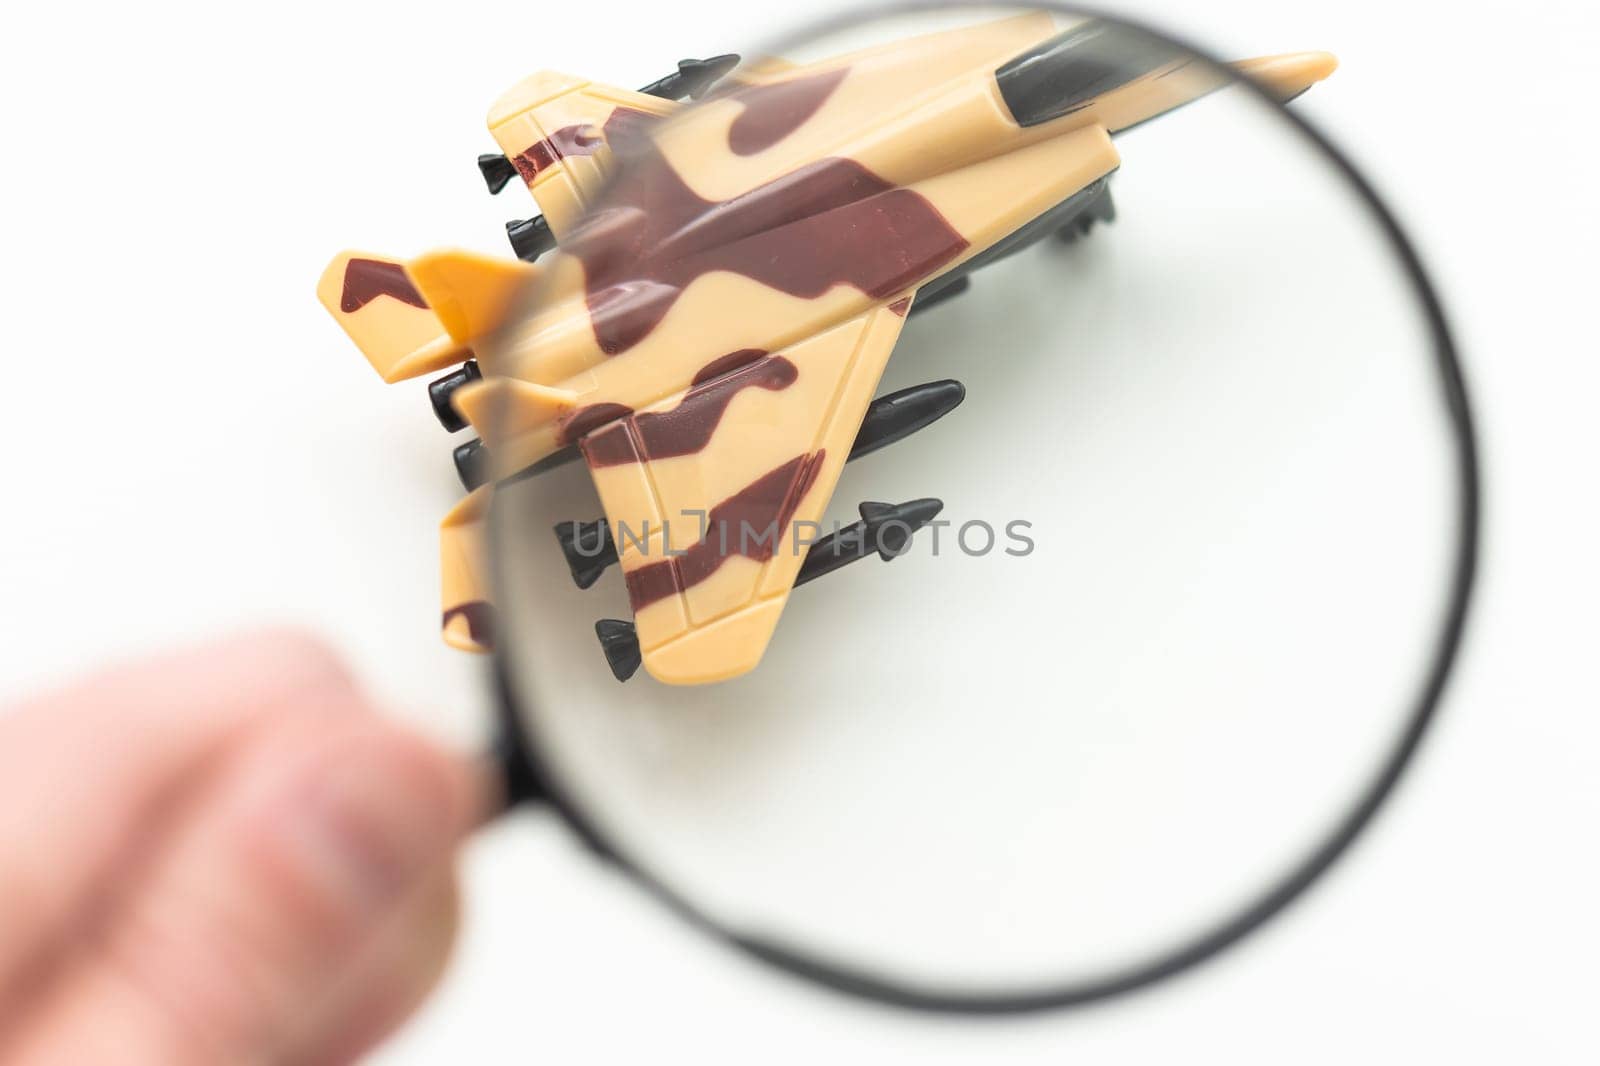 Review airlines company service and tickets price concept. Airplane model under magnifying glass on grey background. by Andelov13